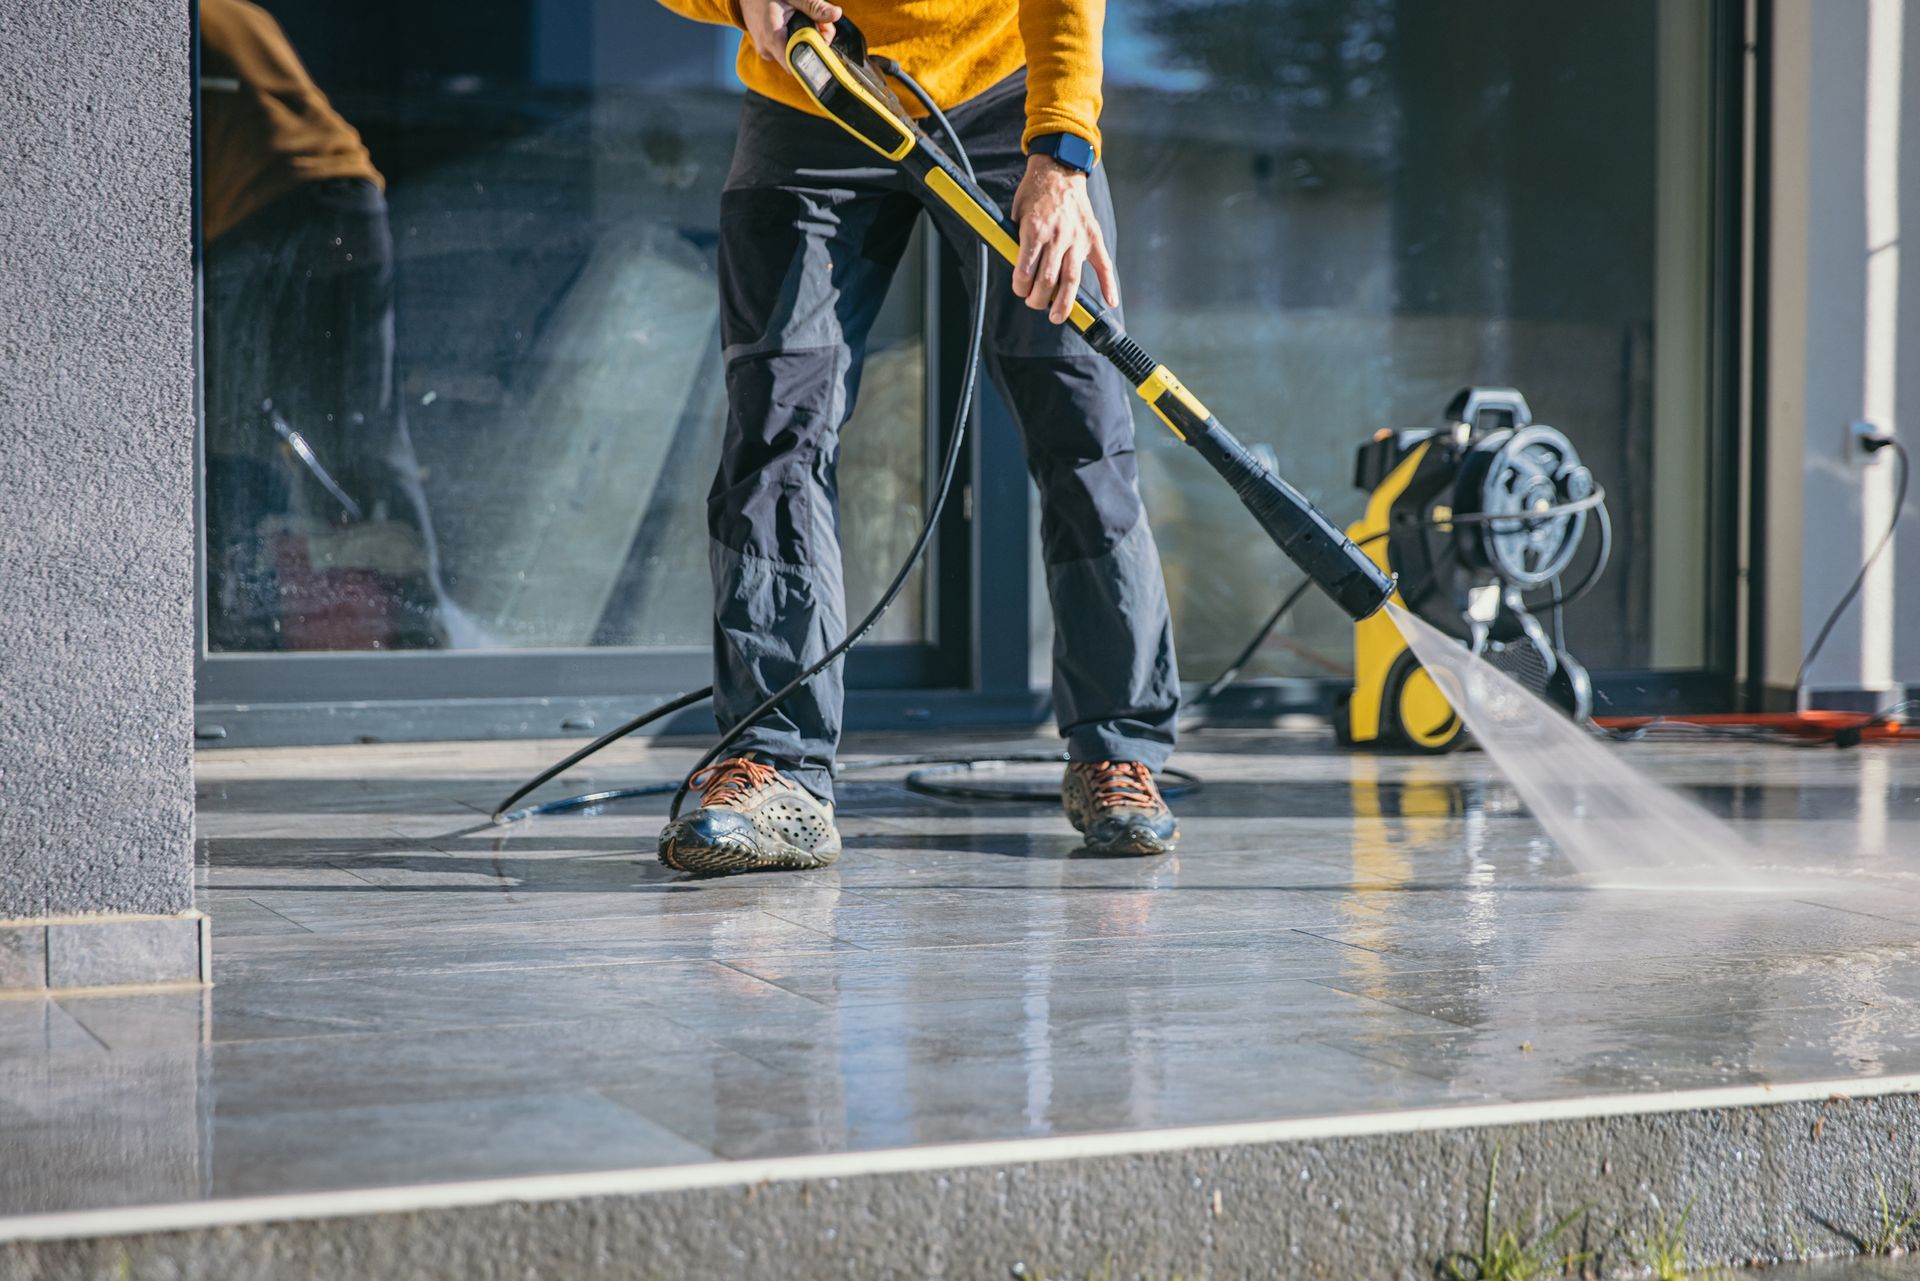 A man is using a high pressure washer to clean a patio.